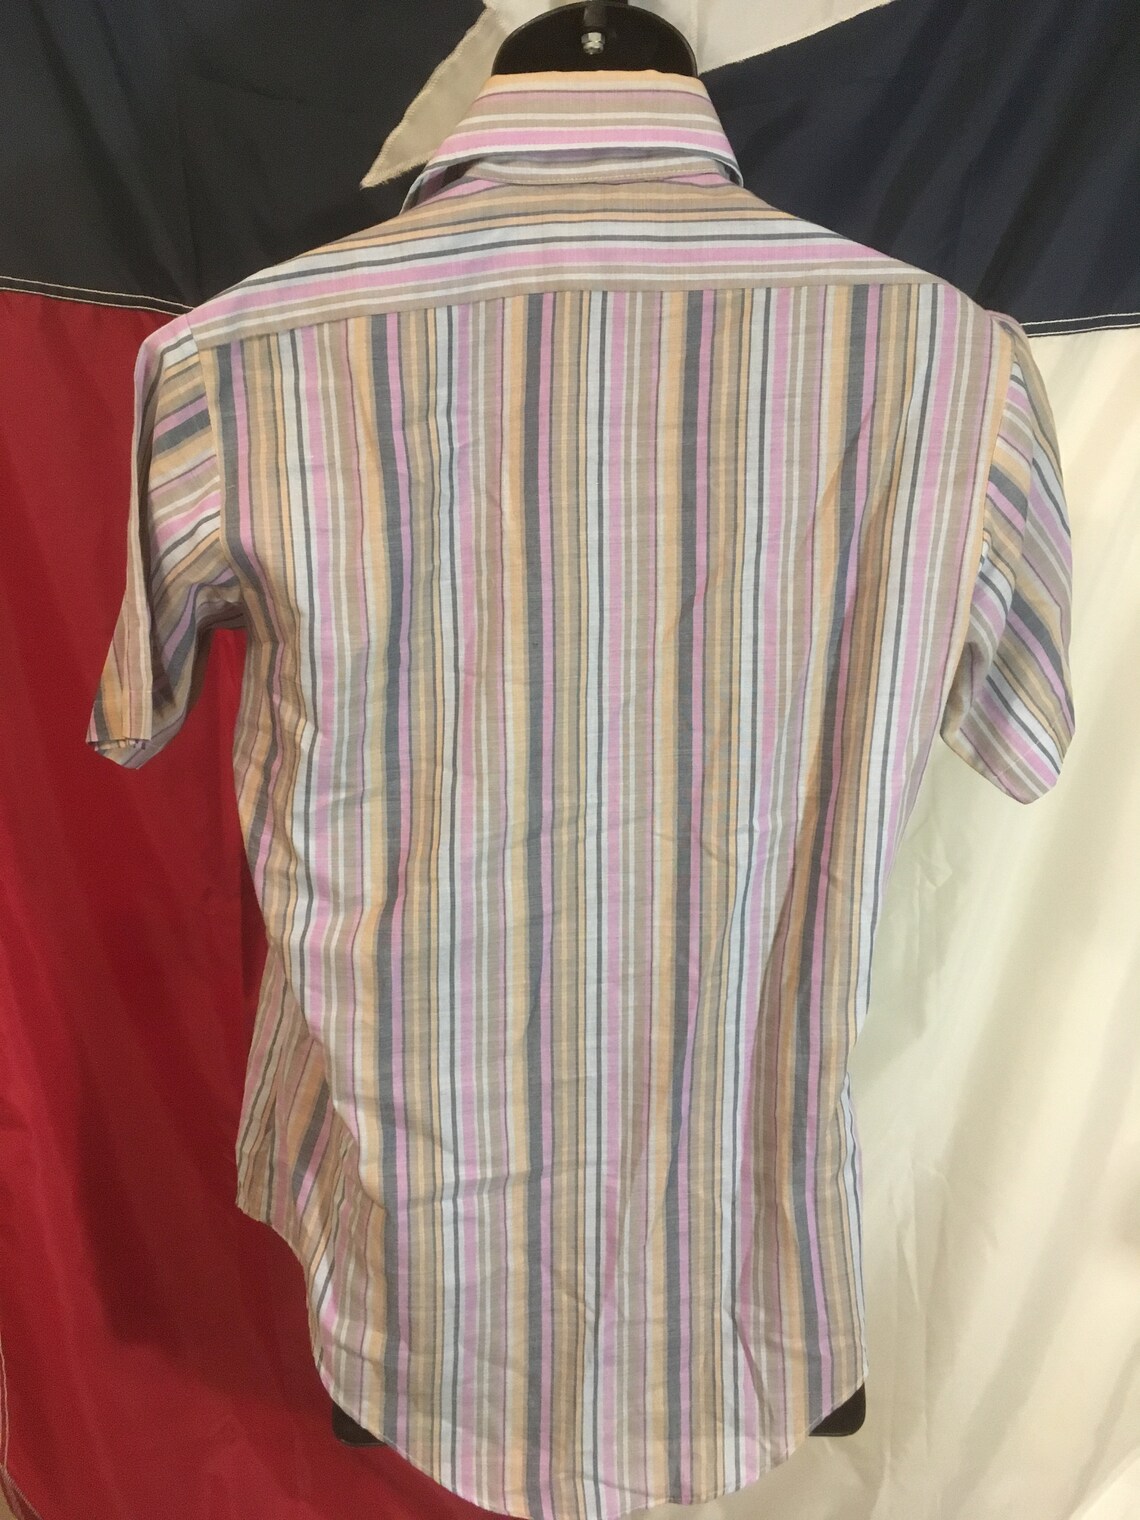 Vintage Purple Striped Shirt by Kmart Size Small | Etsy